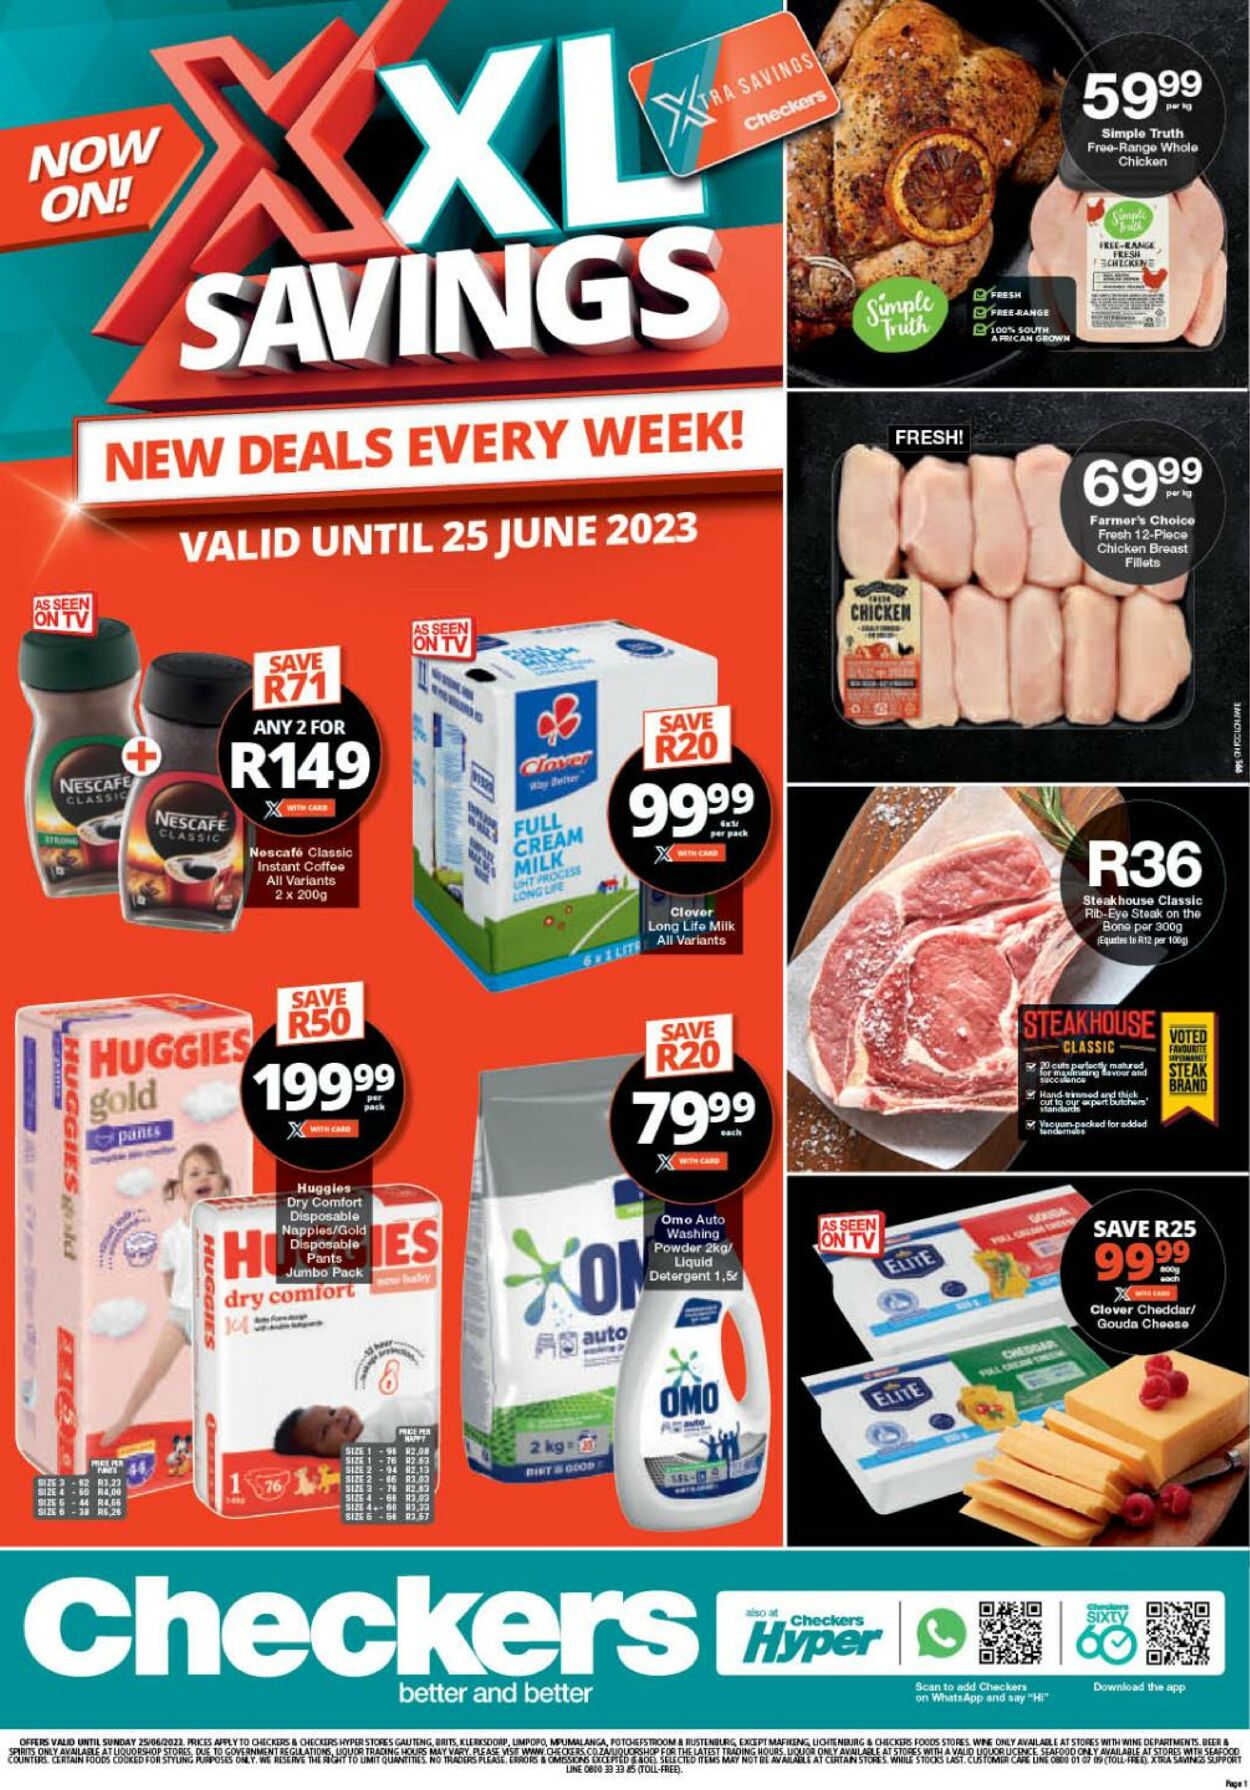 Checkers Current catalogue 2023/06/25 2023/07/09